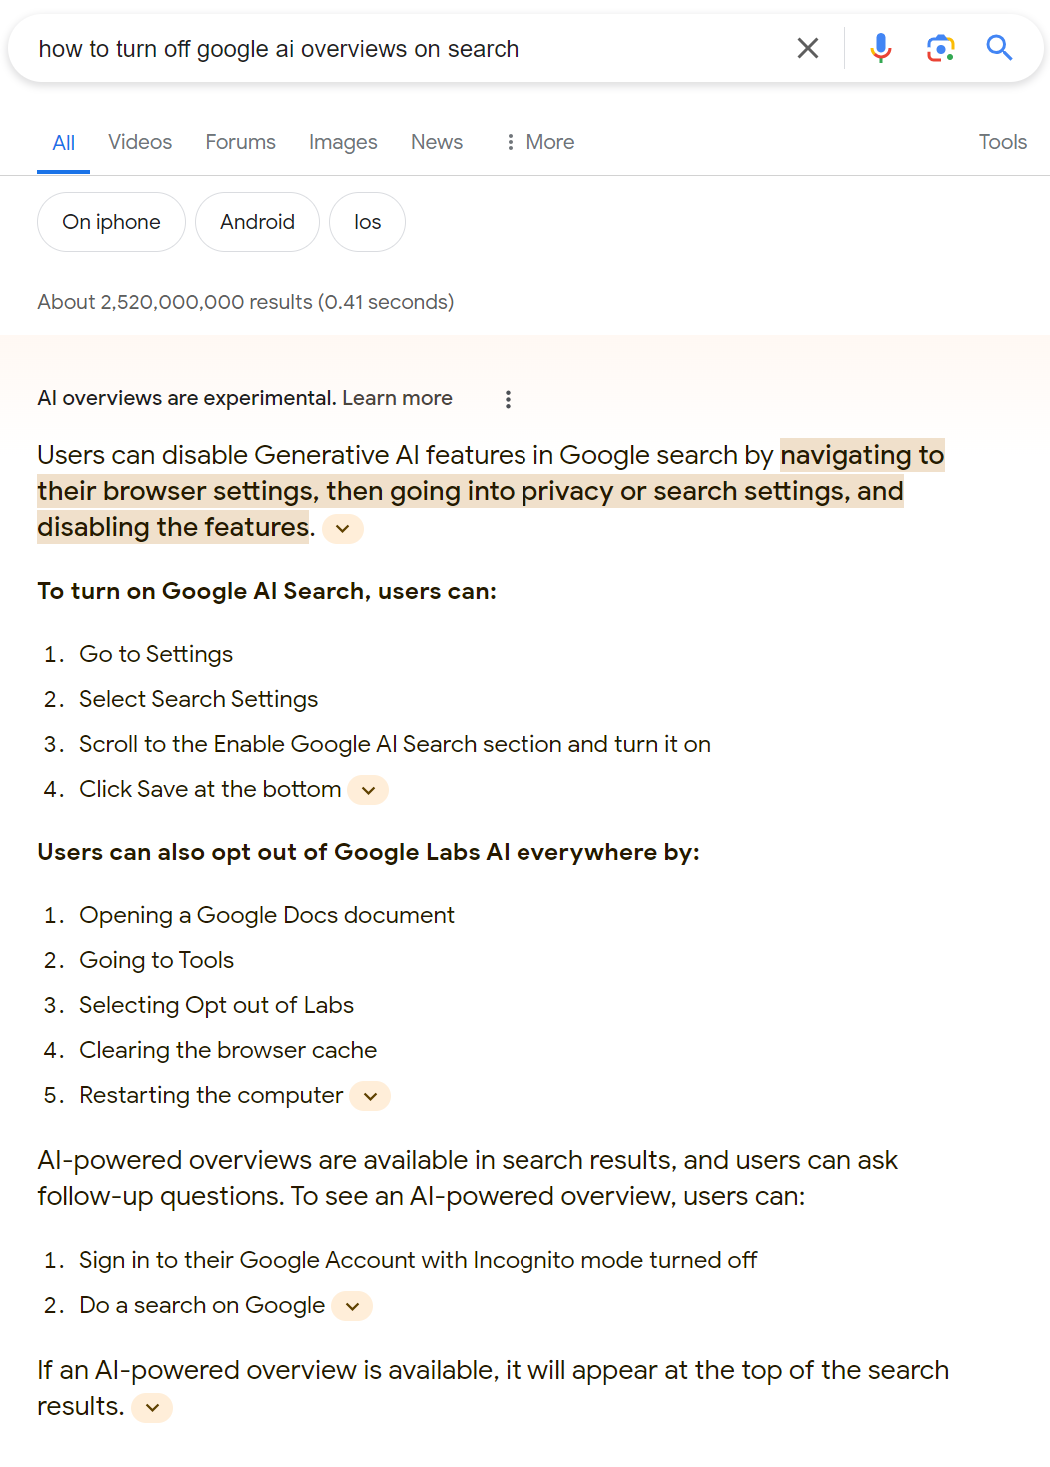 Various browser settings allow for automated text-based search results